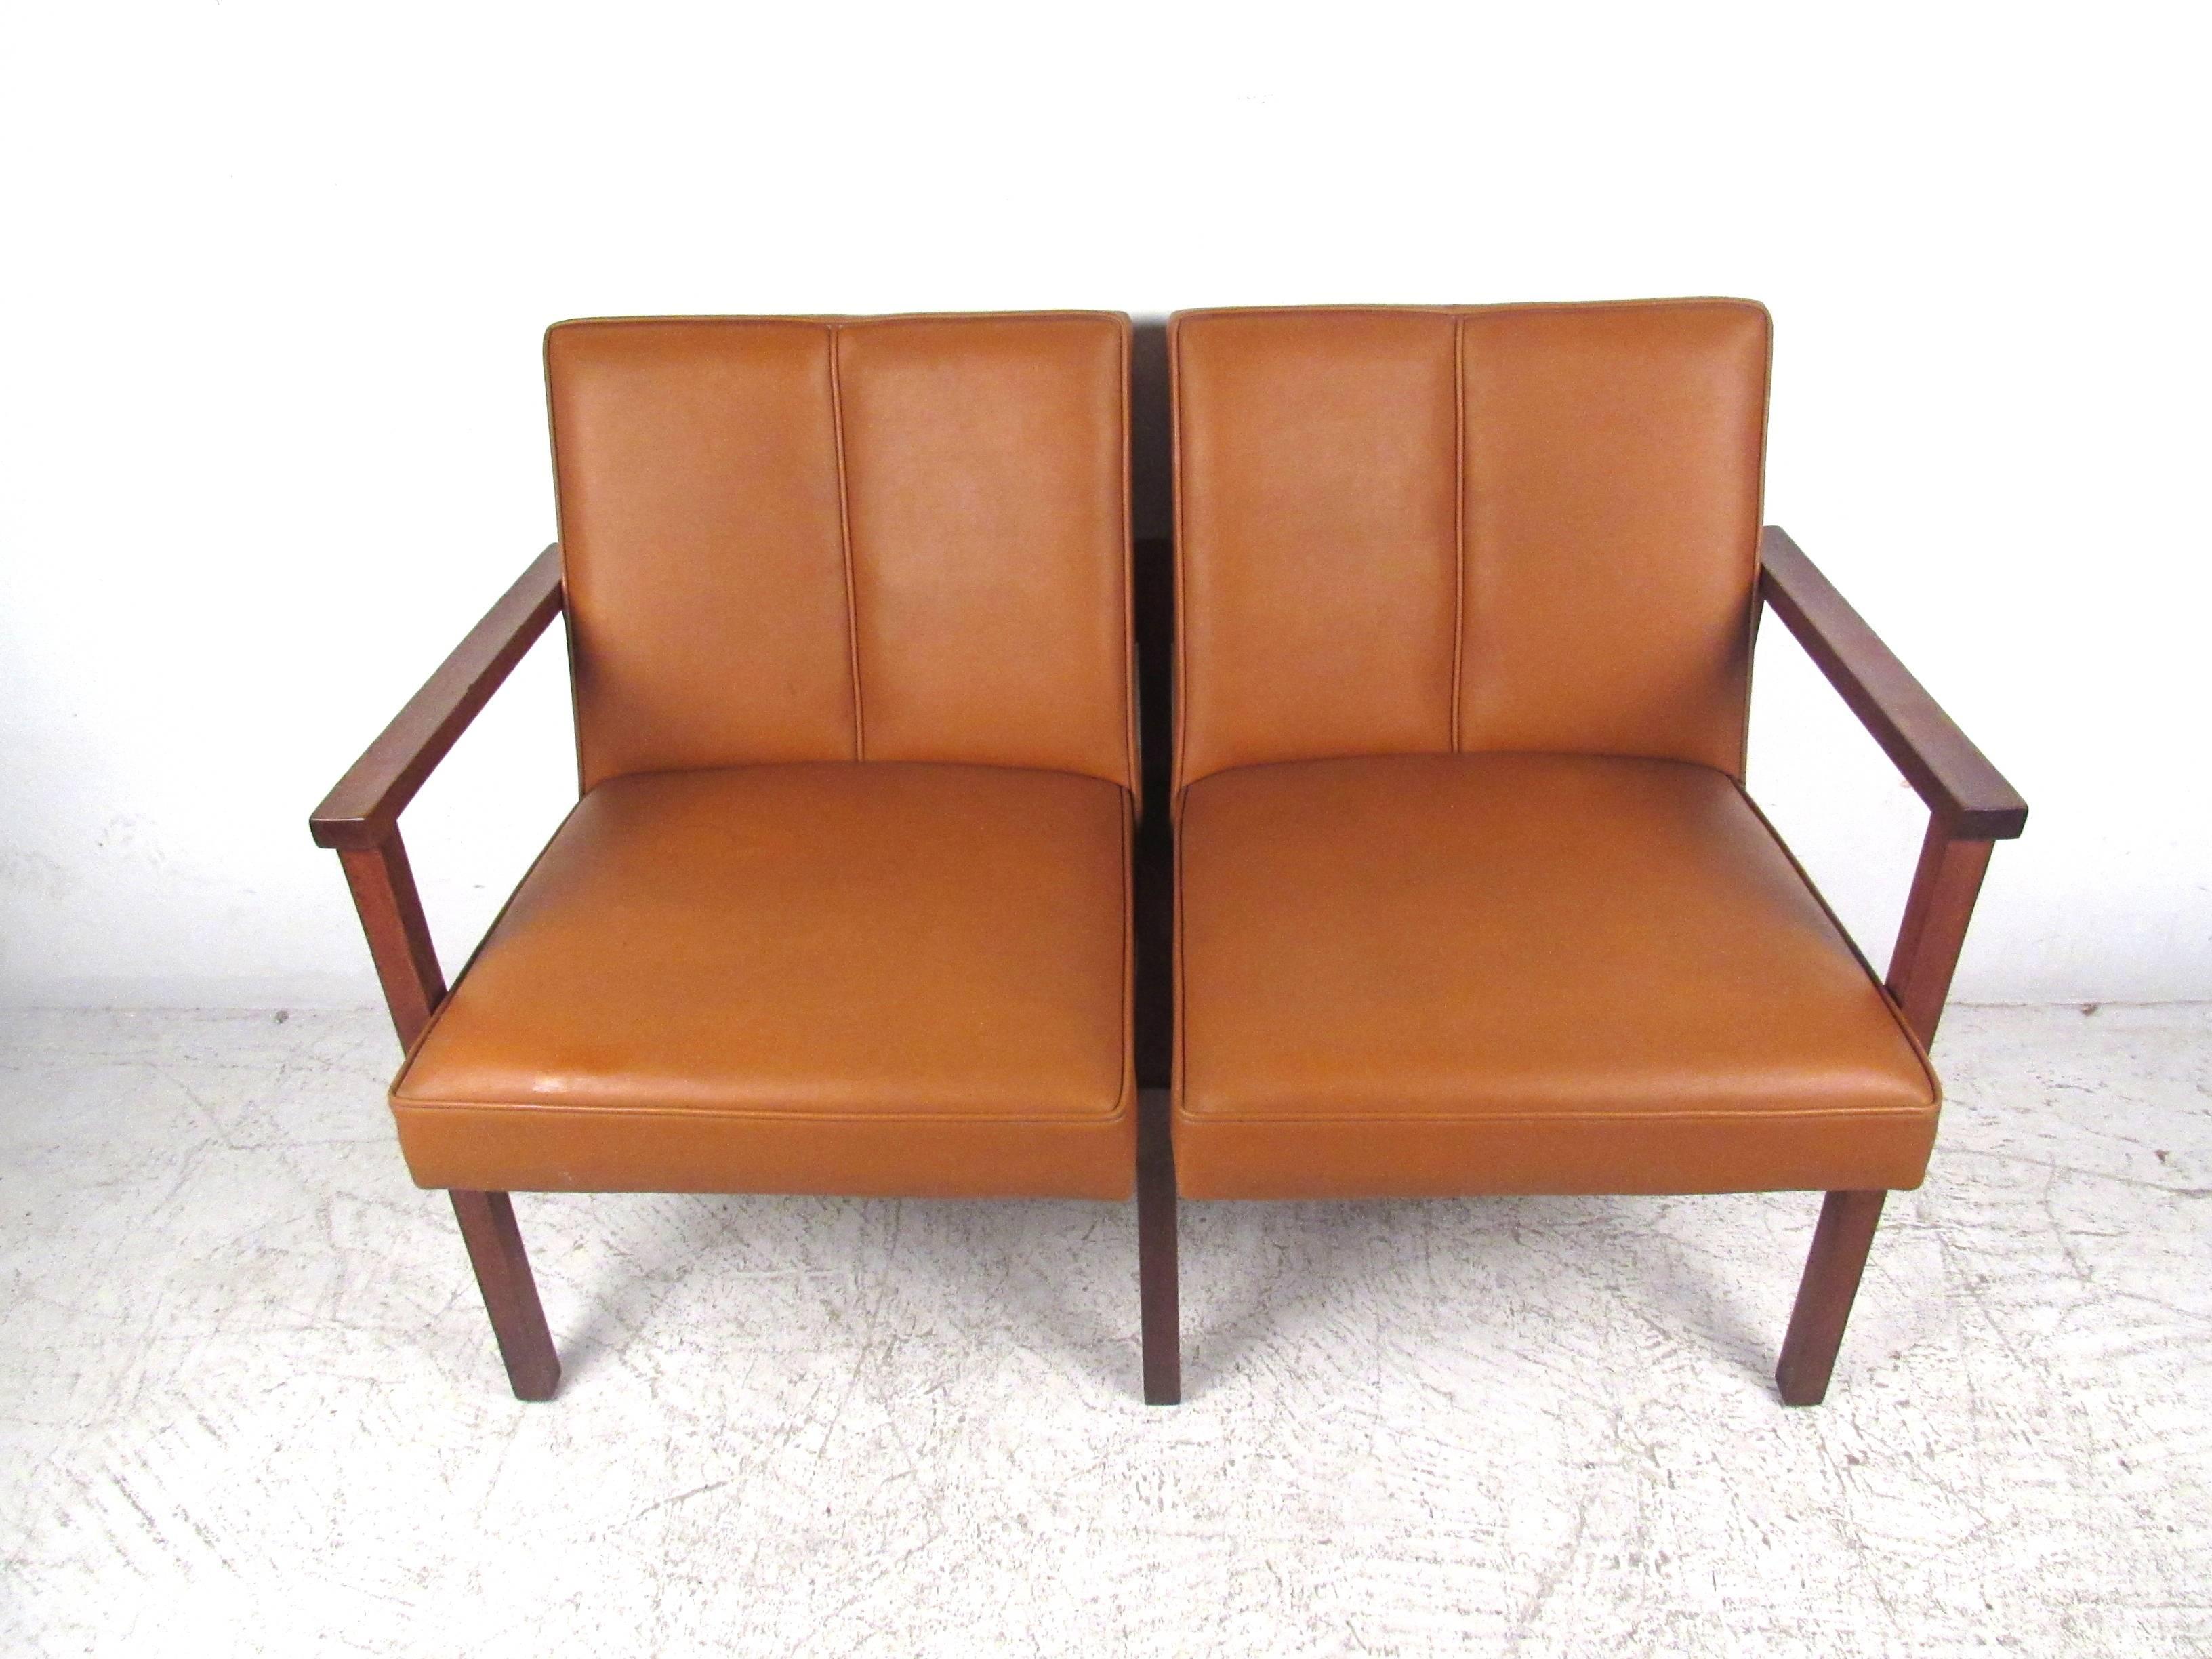 This elegant vinyl and walnut settee features quality craftsmanship, featuring sculpted back and a sturdy frame. The unique appearance and comfort of this piece makes it a wonderful addition to any setting. Please confirm location (NY or NJ).